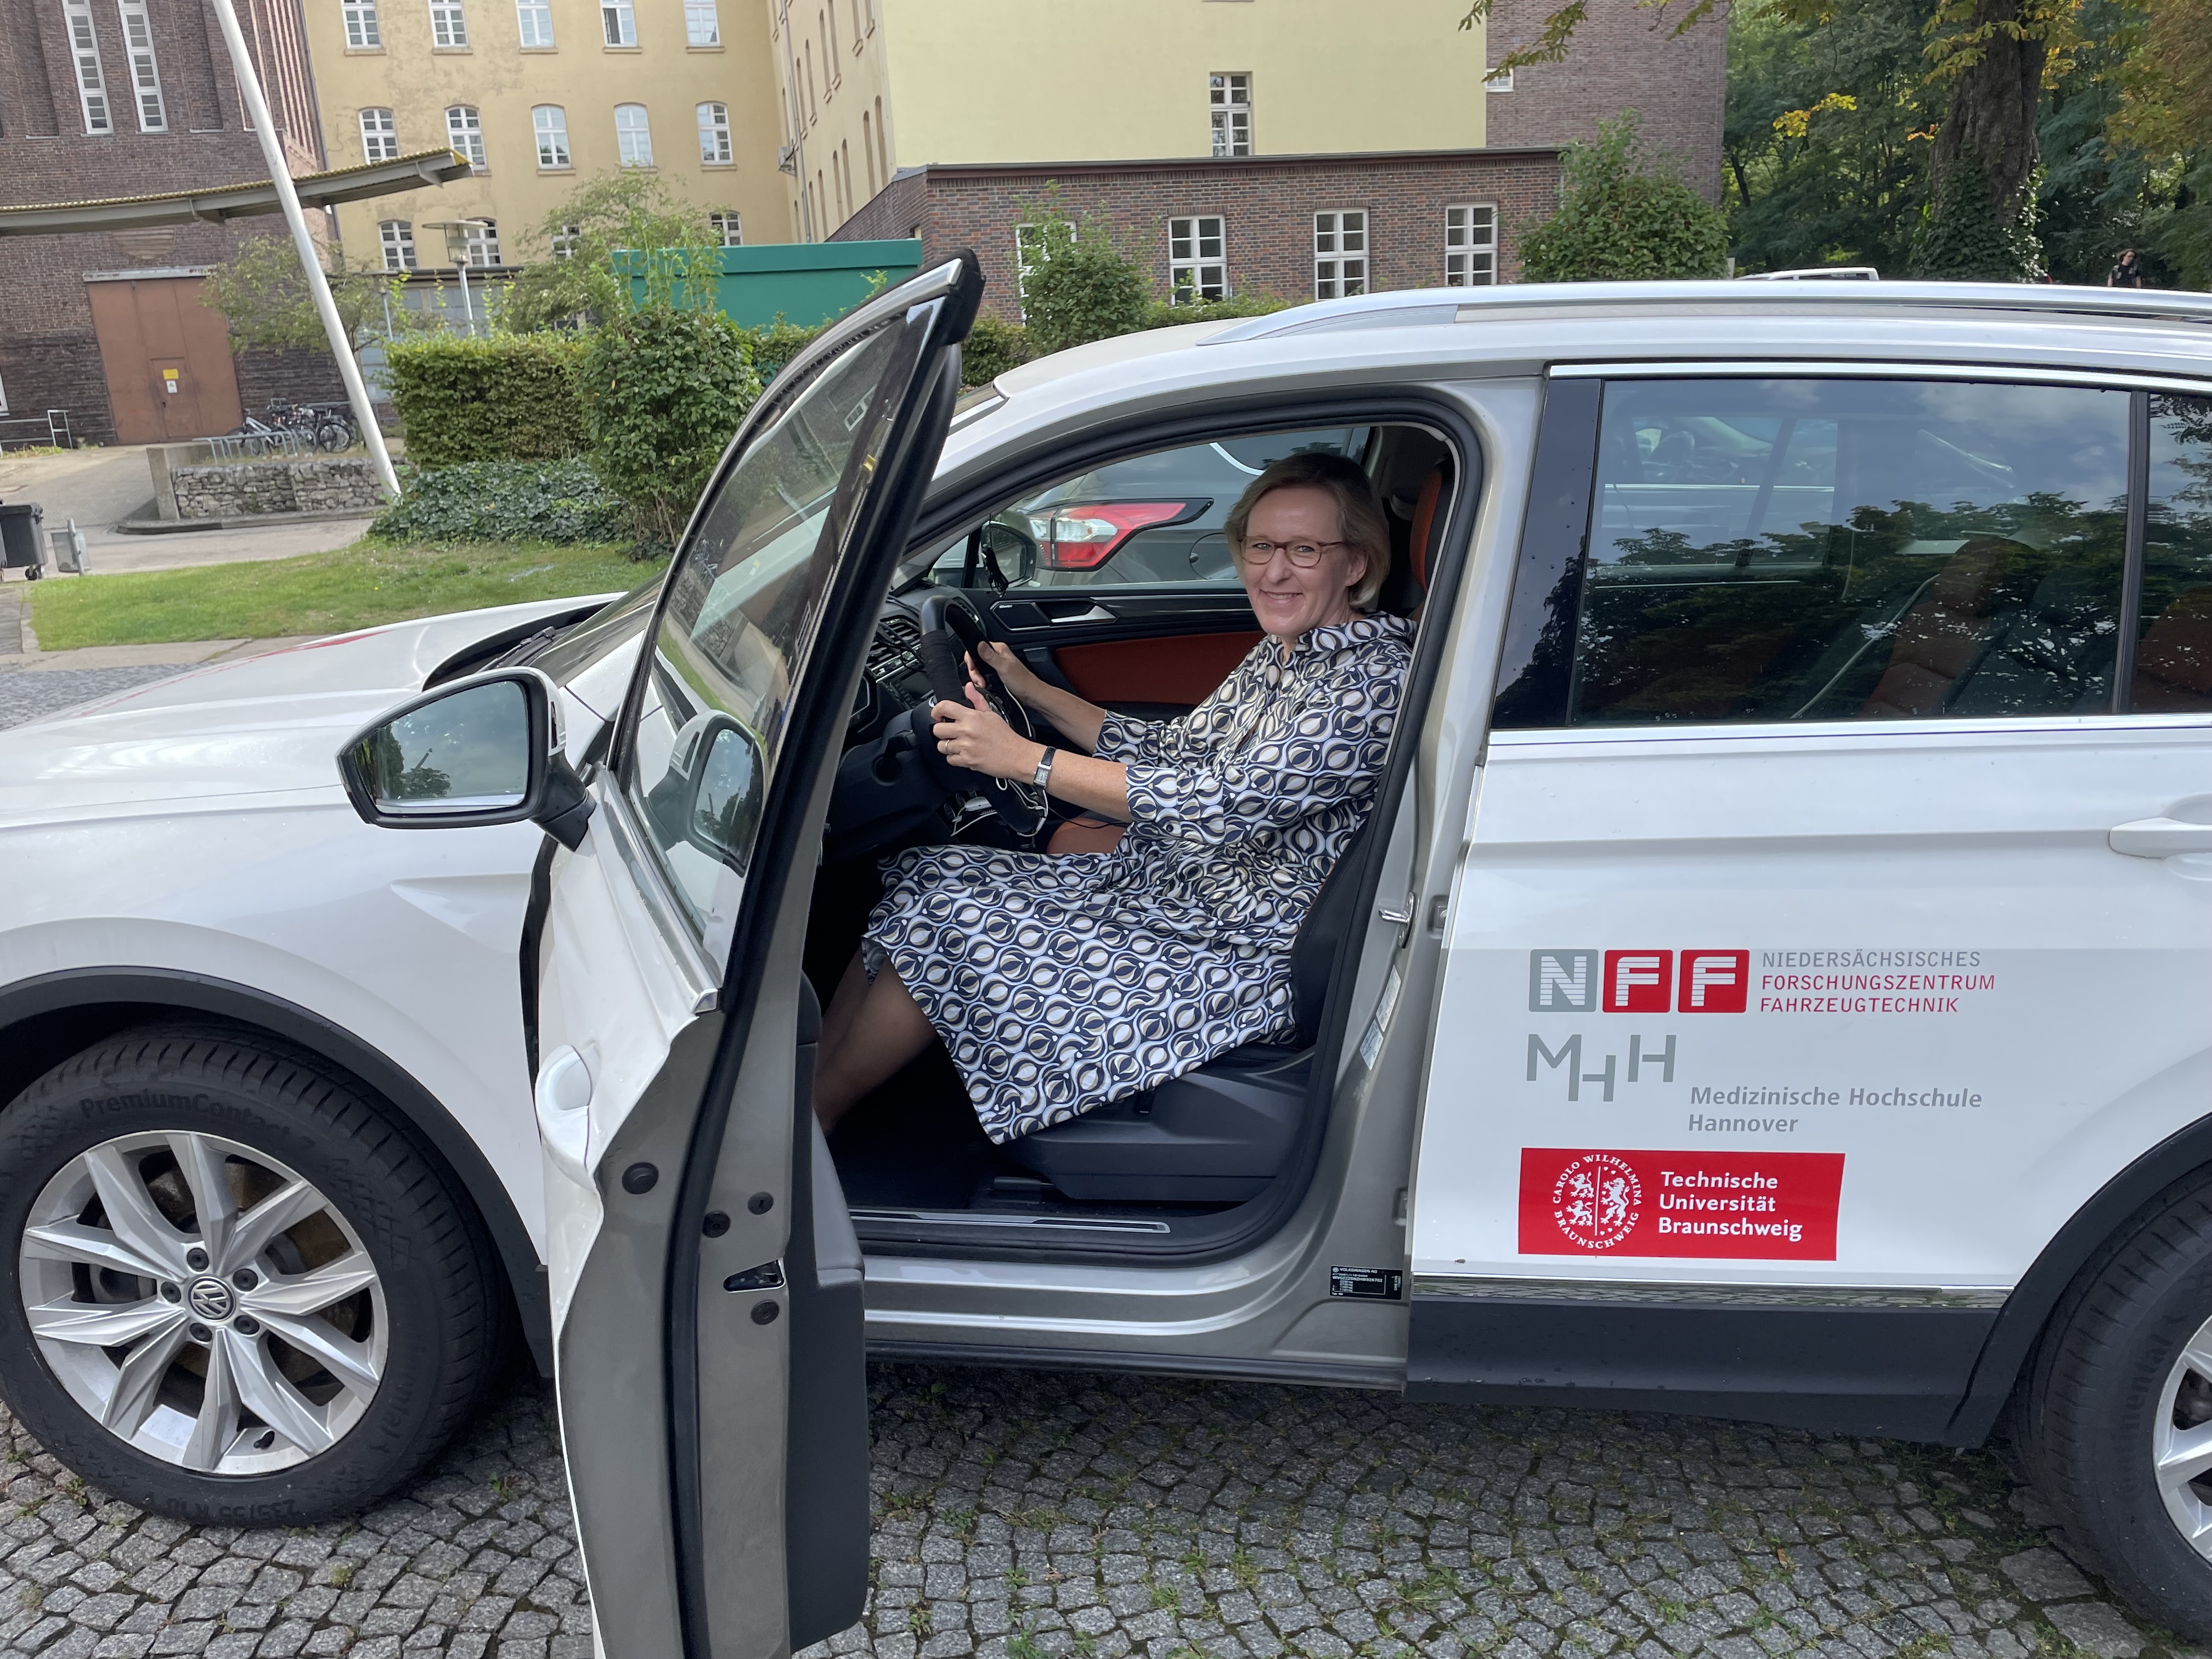 Visit by Ute Hönemann from the Lower Saxony Ministry of Economy, Transport, and Digitalization to PLRI